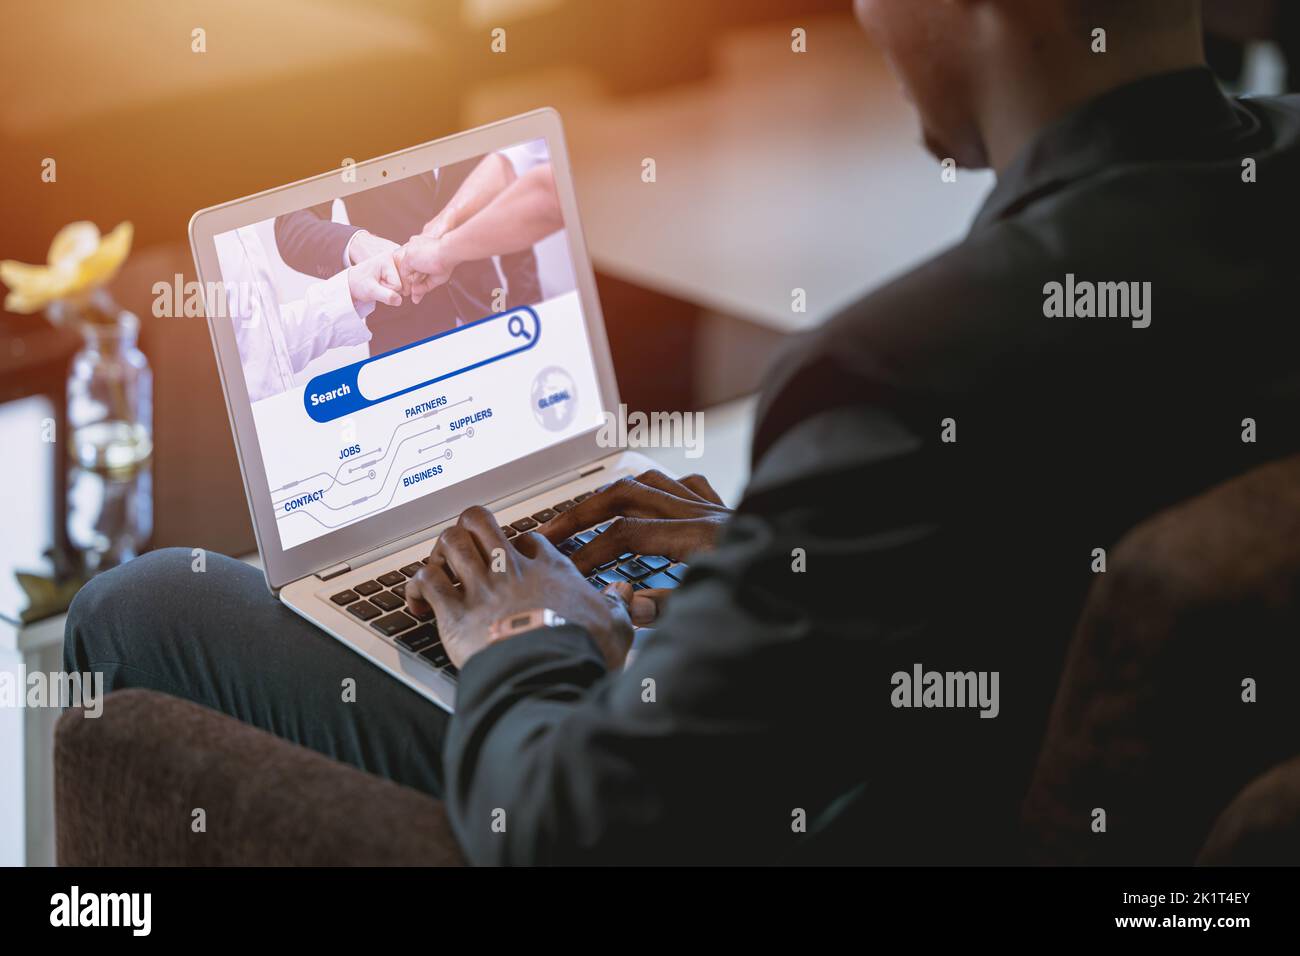 closeup search engine screen of business man using laptop computer Stock Photo